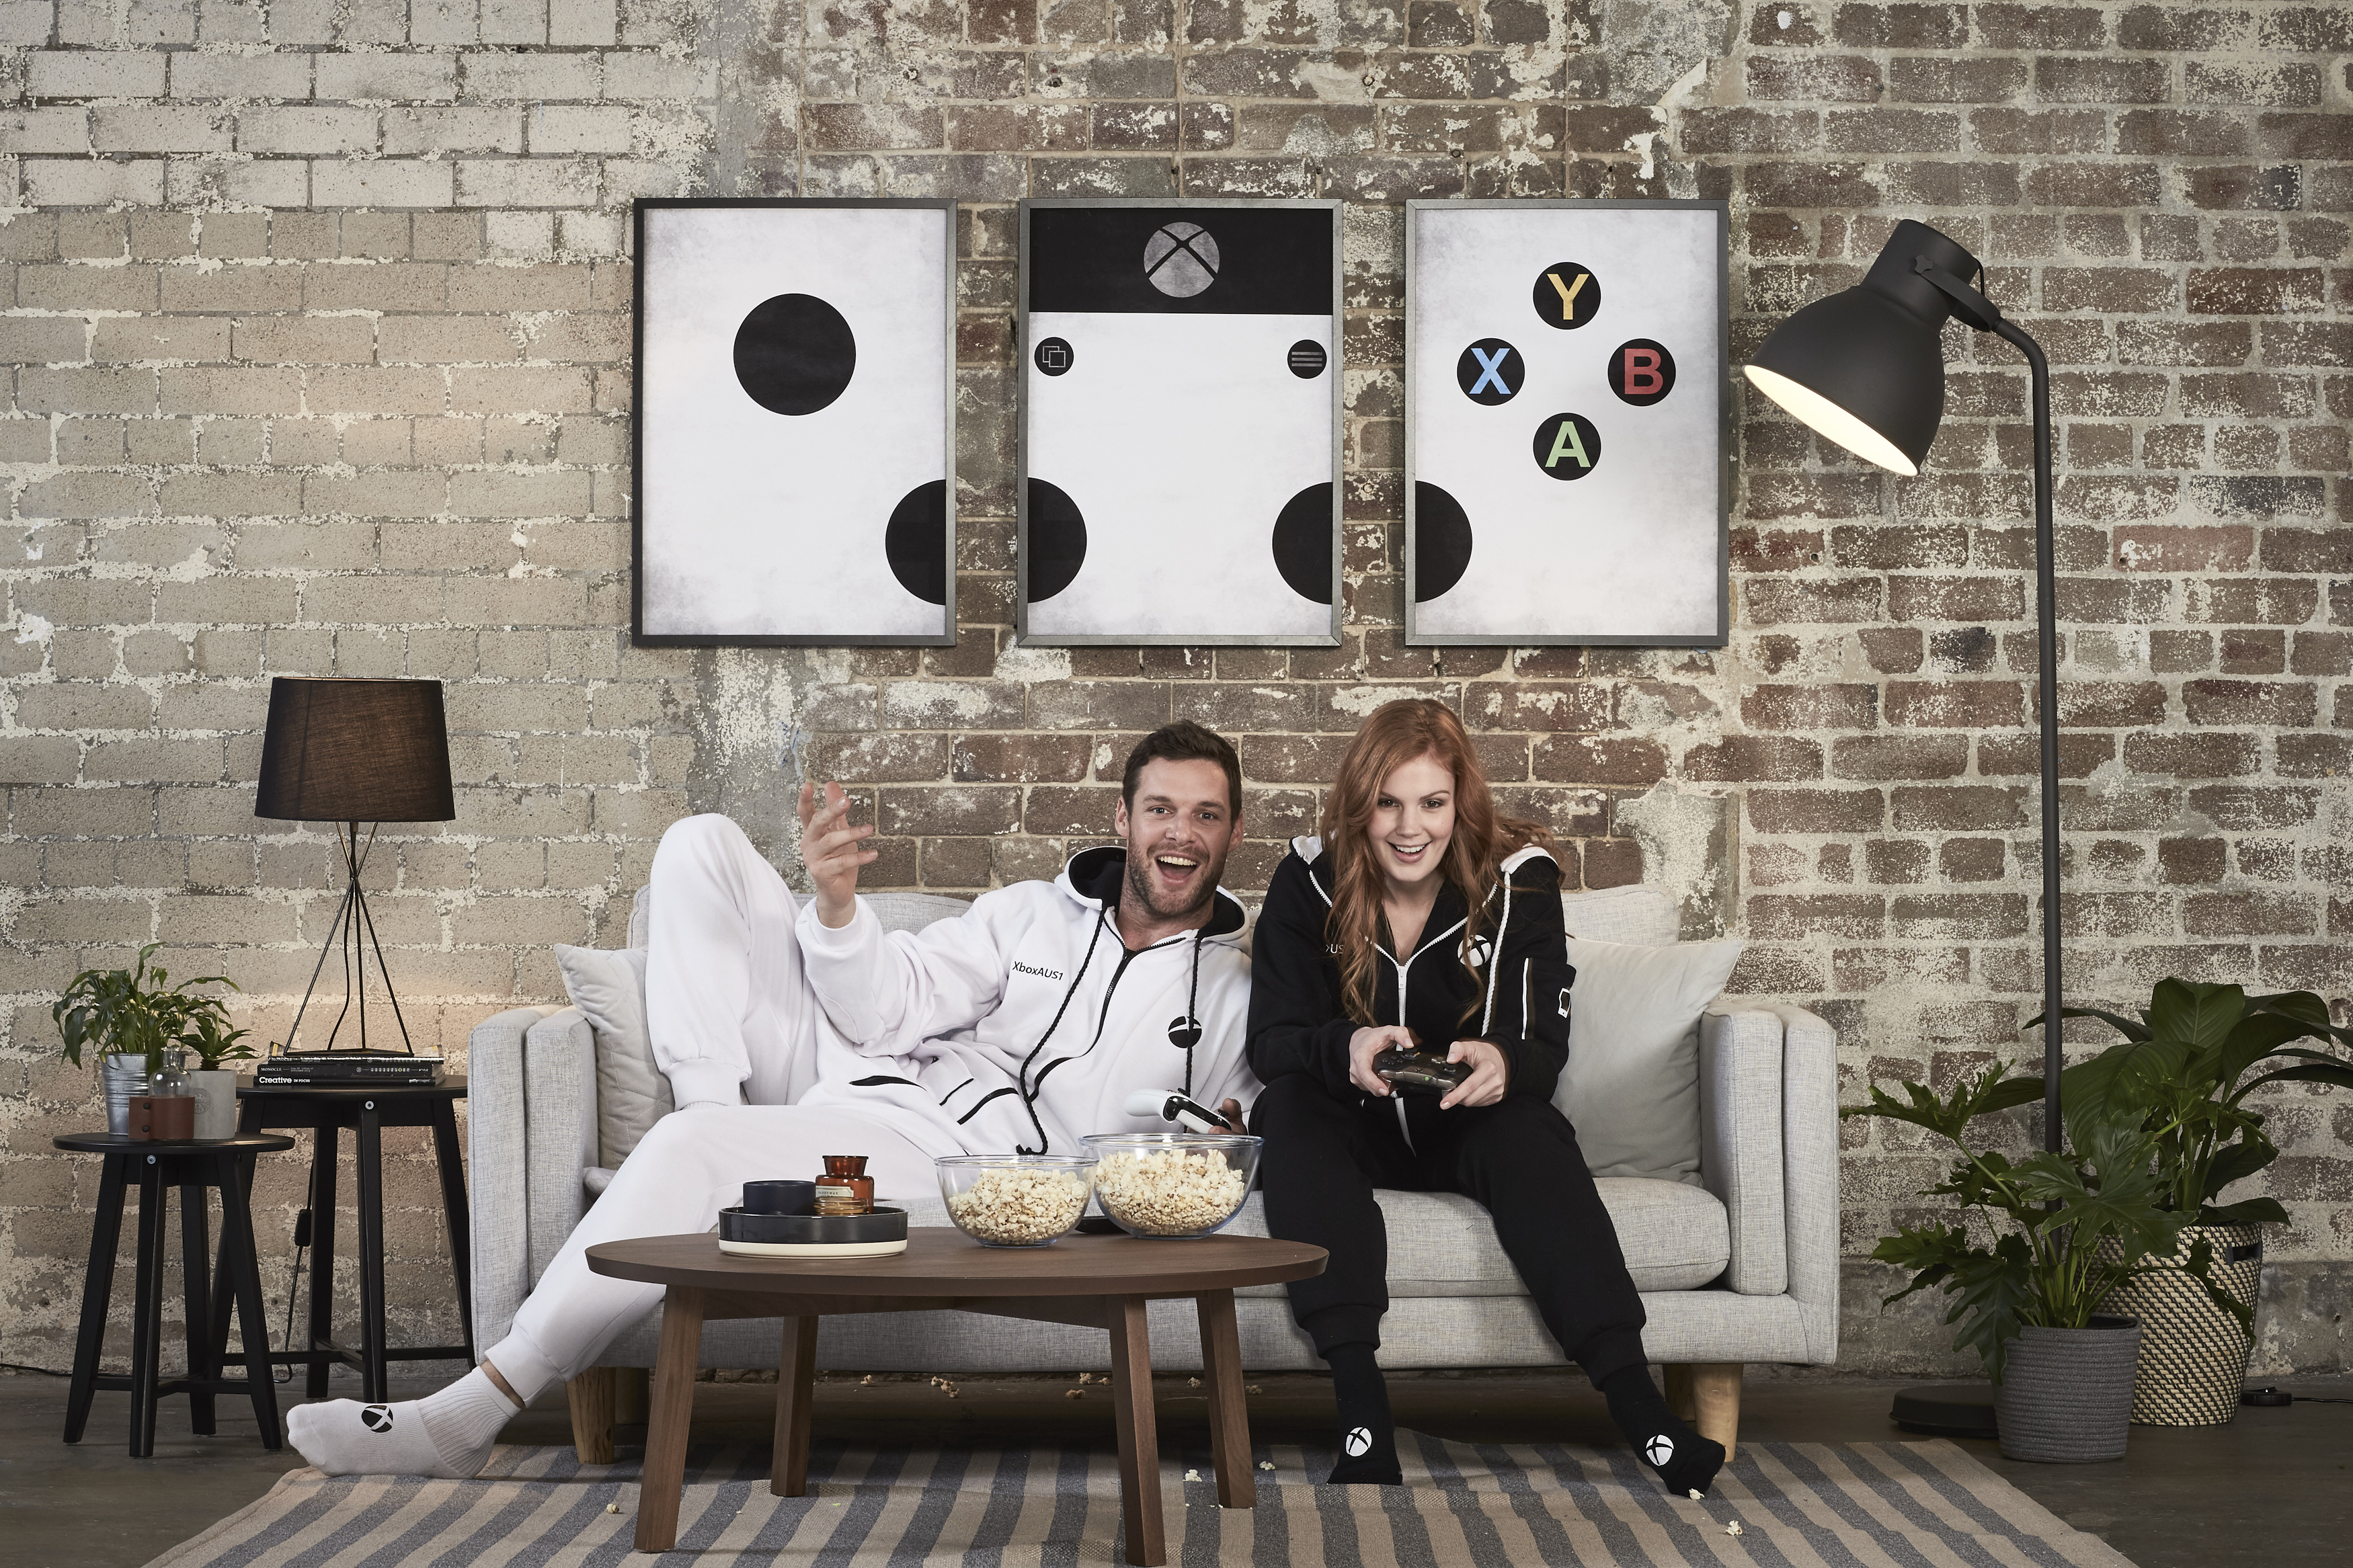 Xbox unveils its latest design… and it’s not what you might